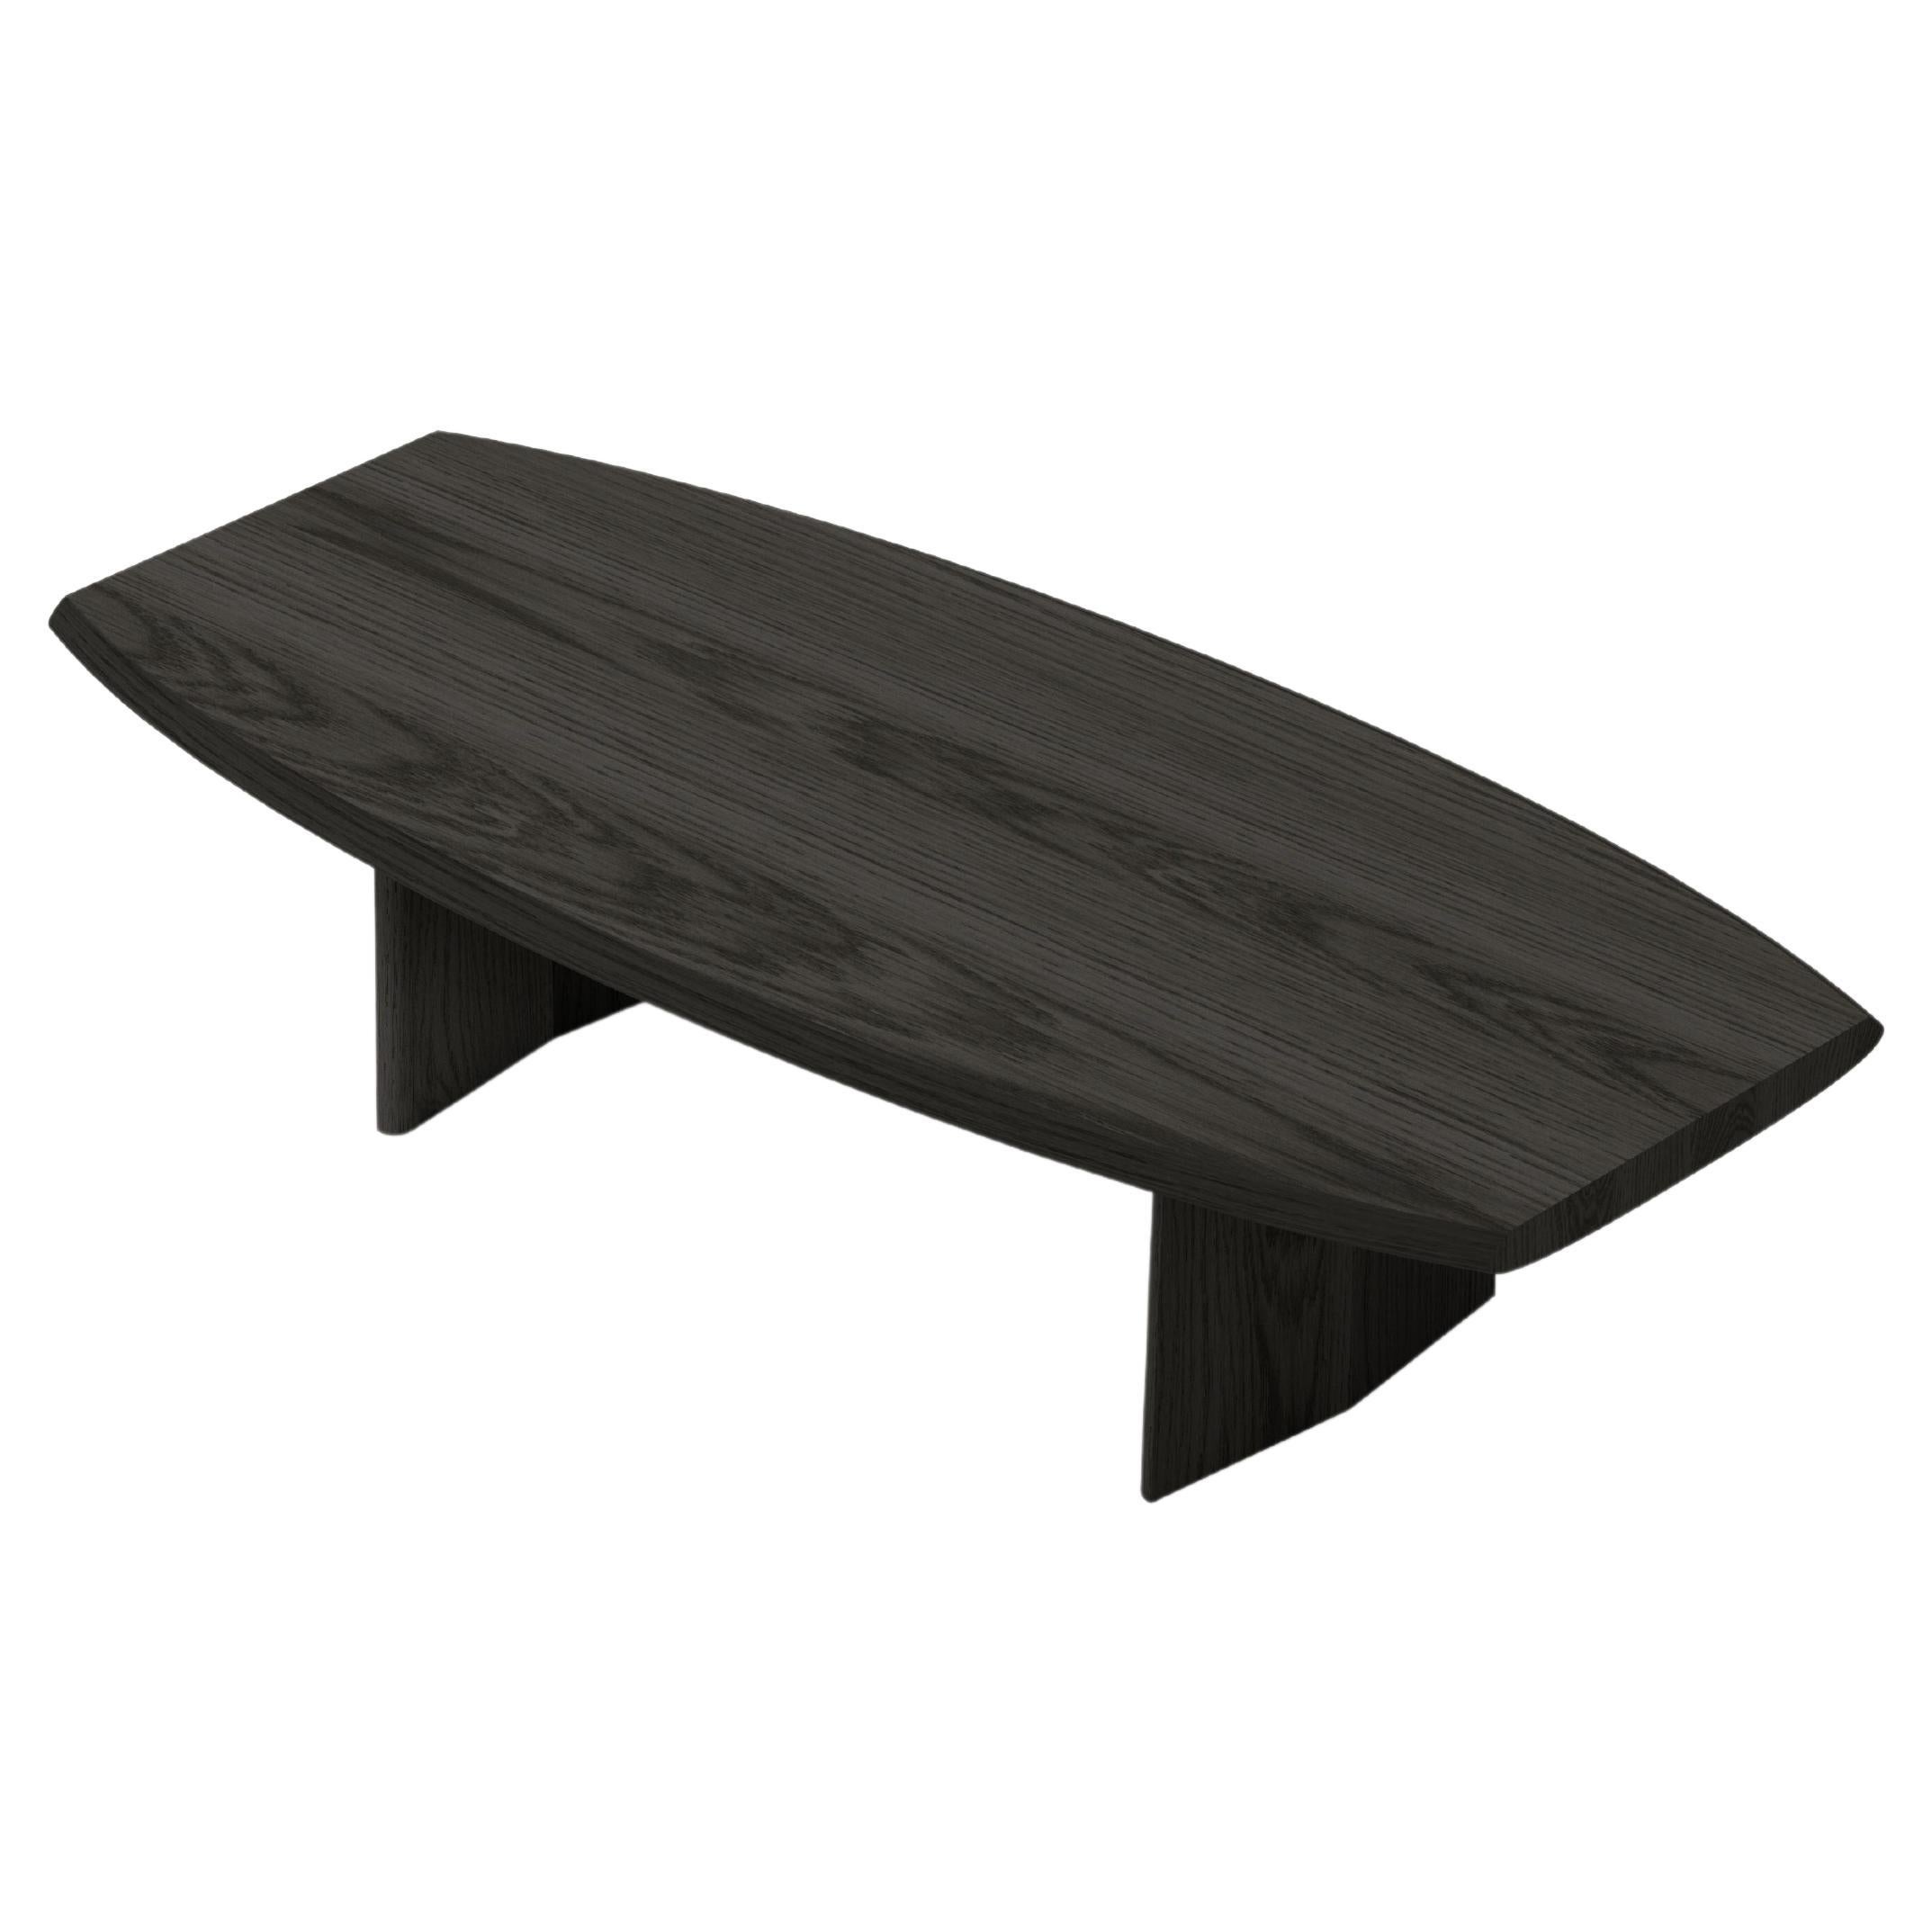 Peana Coffee Table, Bench in Black Tinted Solid Wood Finish by Joel Escalona